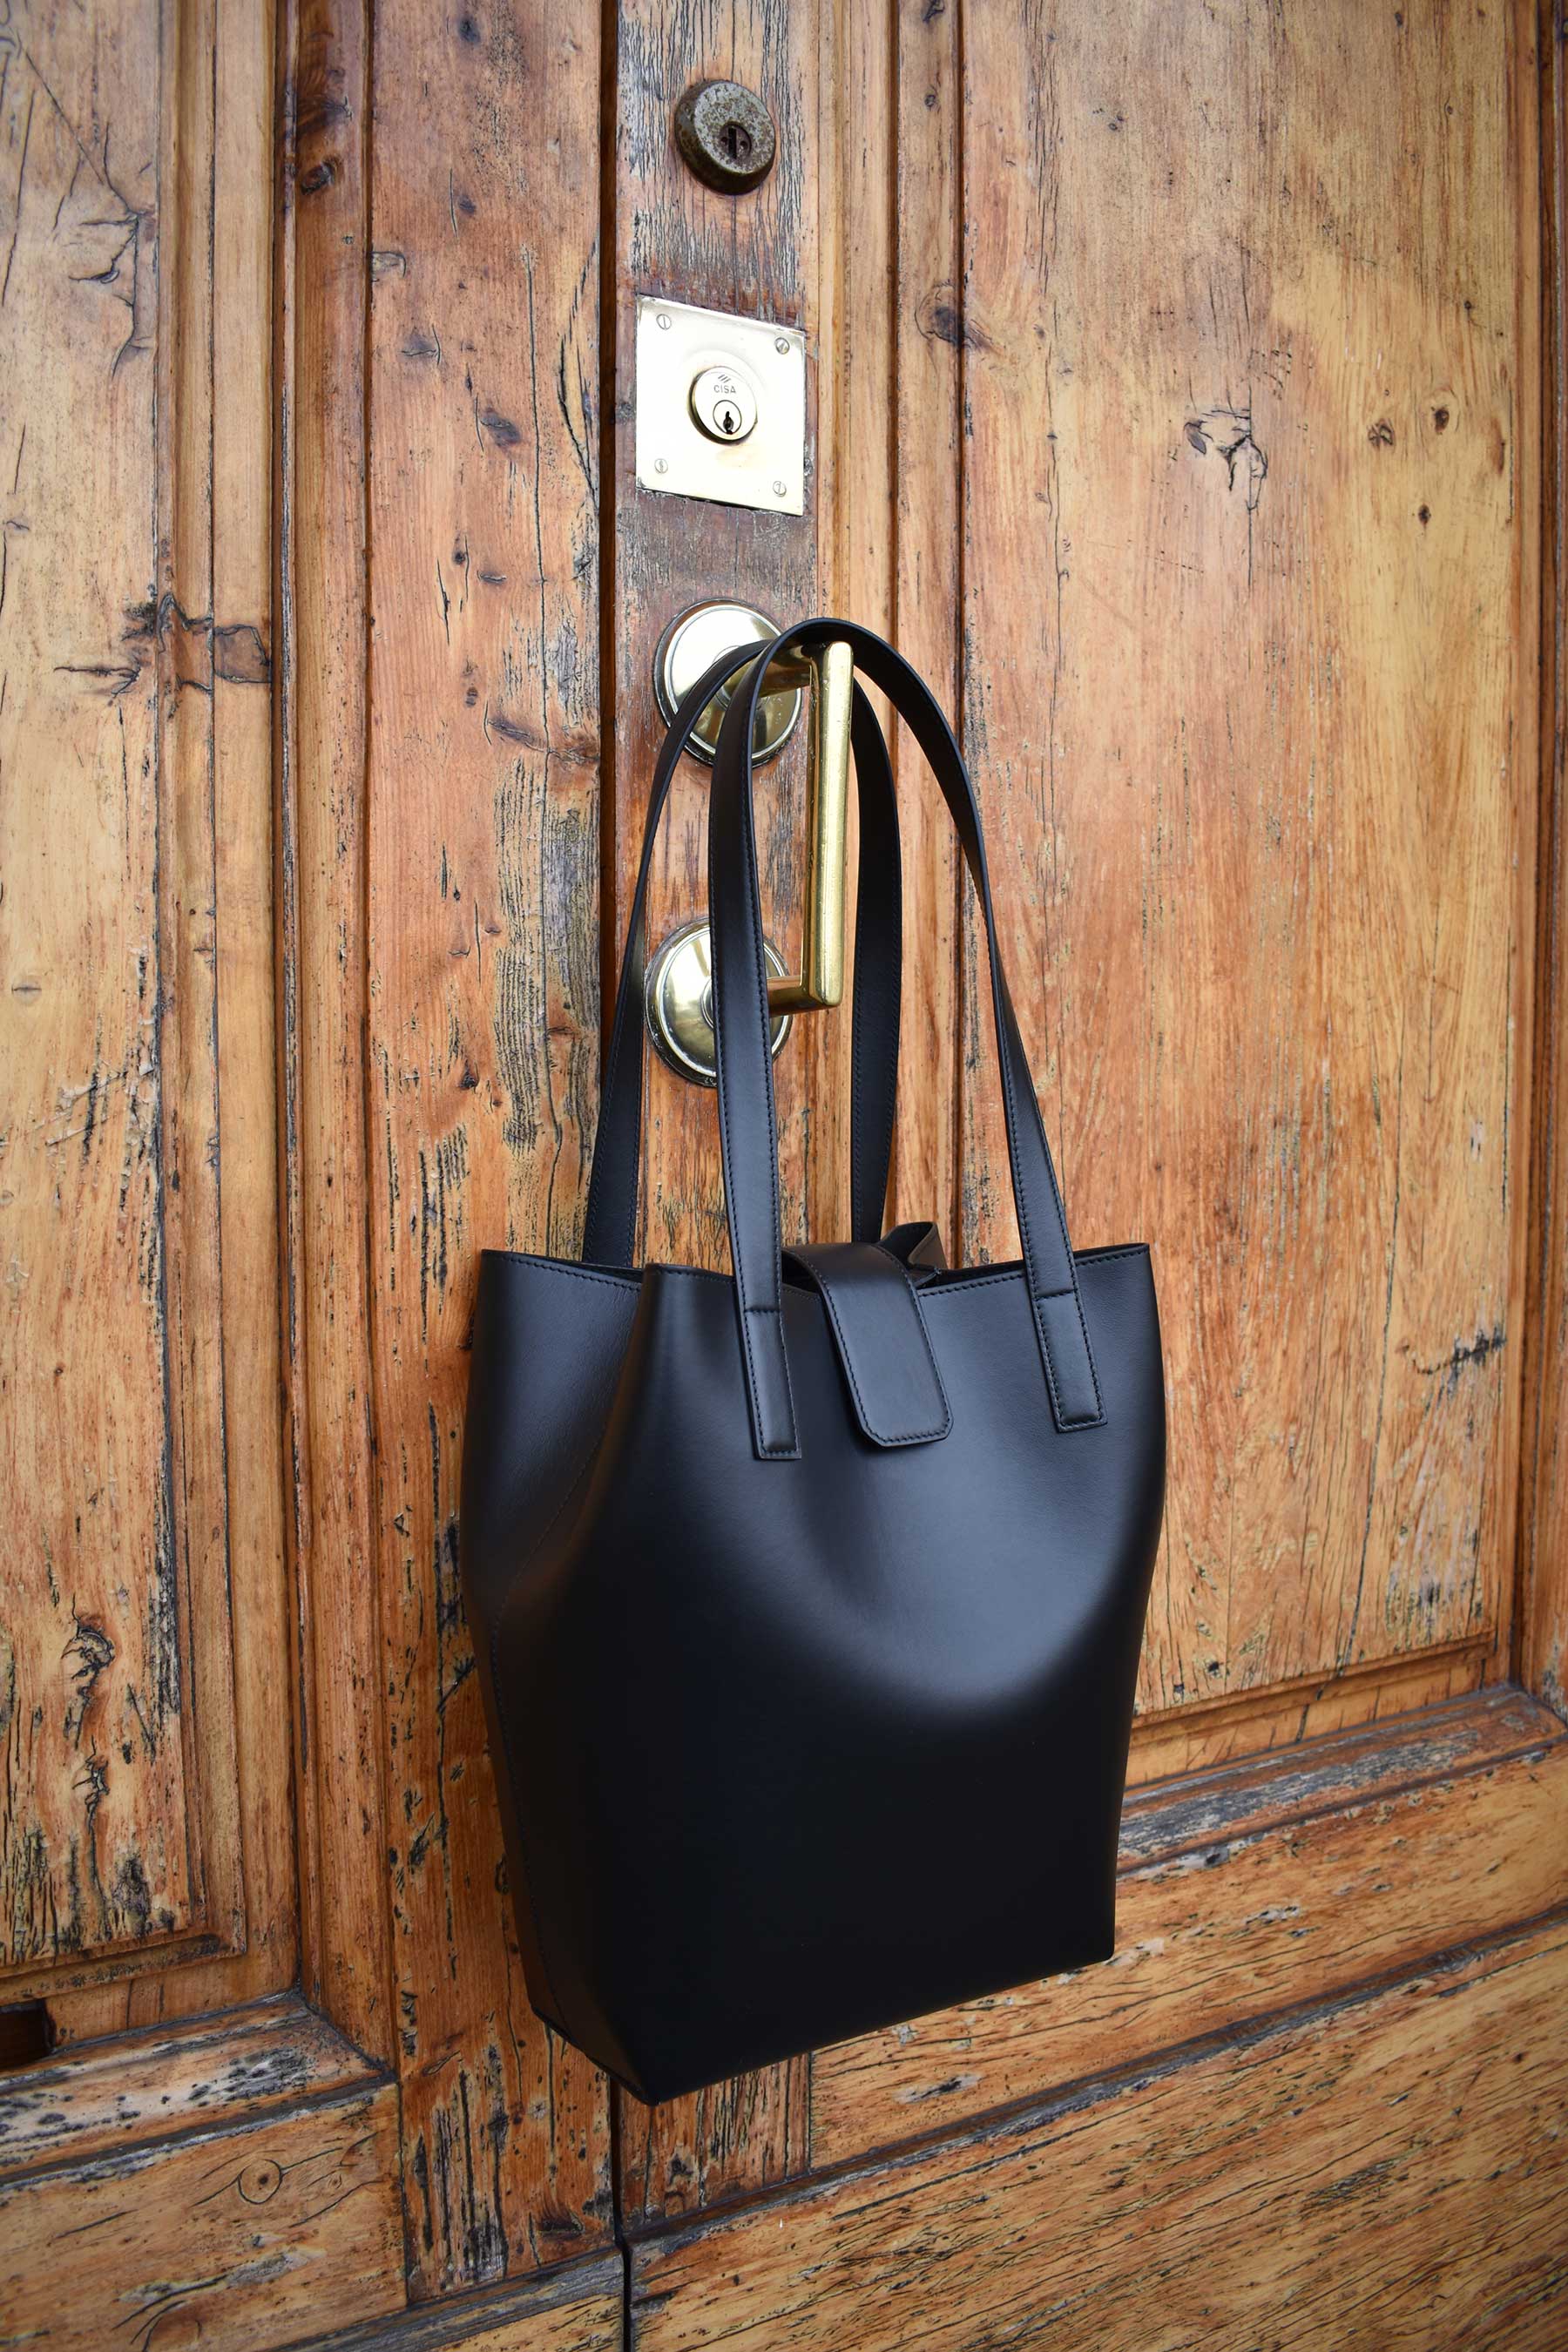 Chandra Keyser La Borsa Black Bucket Tote Bag Lightweight with two shoulder straps, snap closure, separate micro-suede zip pouch and inside clasp to contract and expand bag. Hanging on a wooden door.